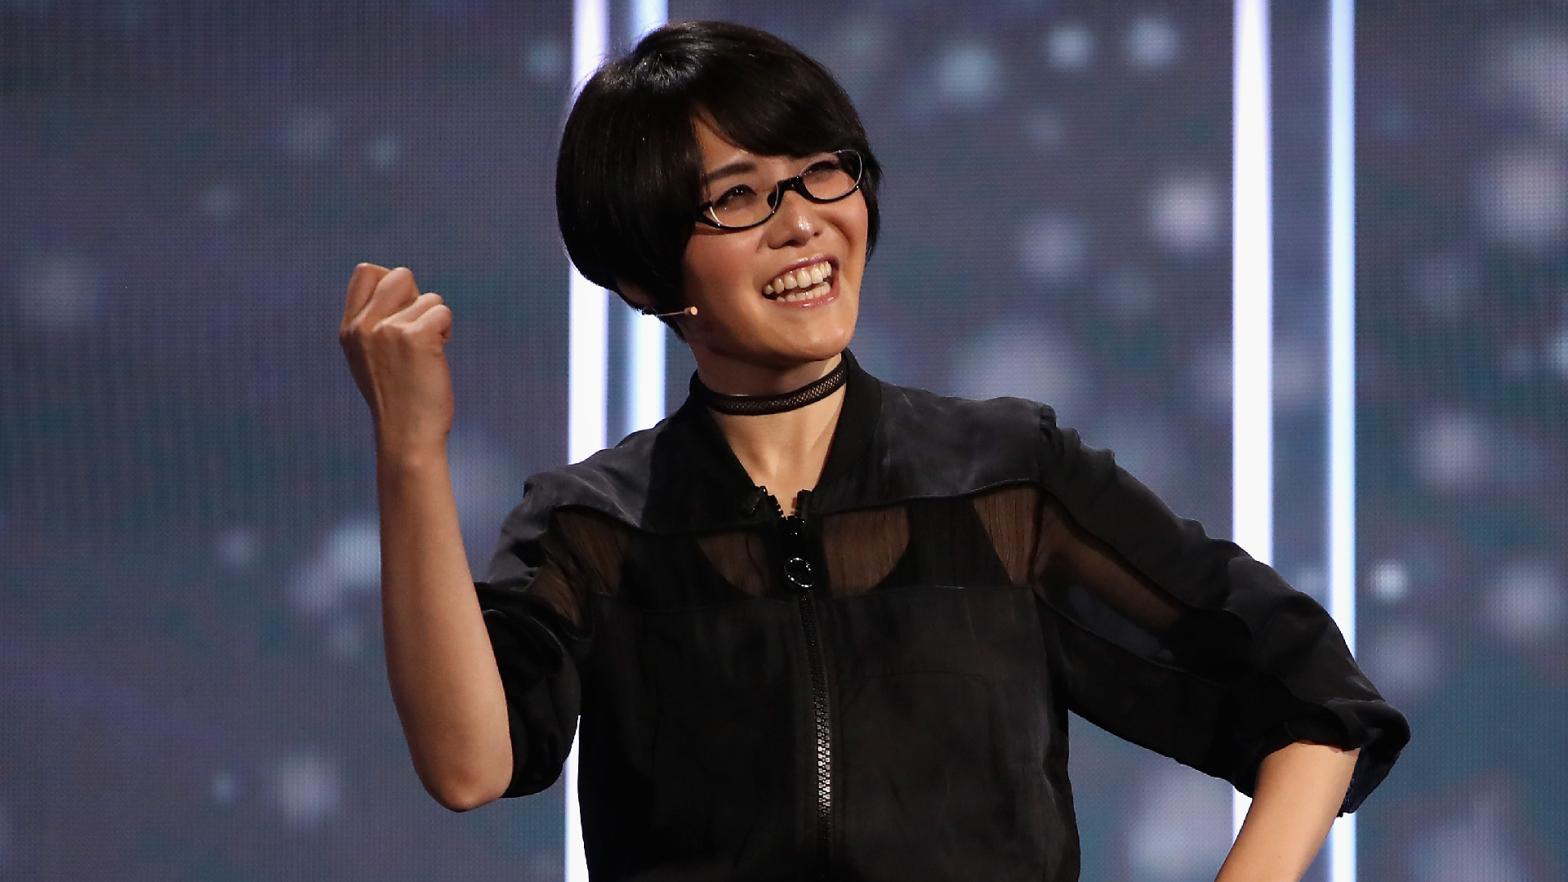 Ikumi Nakamura burst into the gaming zeitgeist with her energetic presentation at E3 2019. (Photo: Christian Petersen, Getty Images)